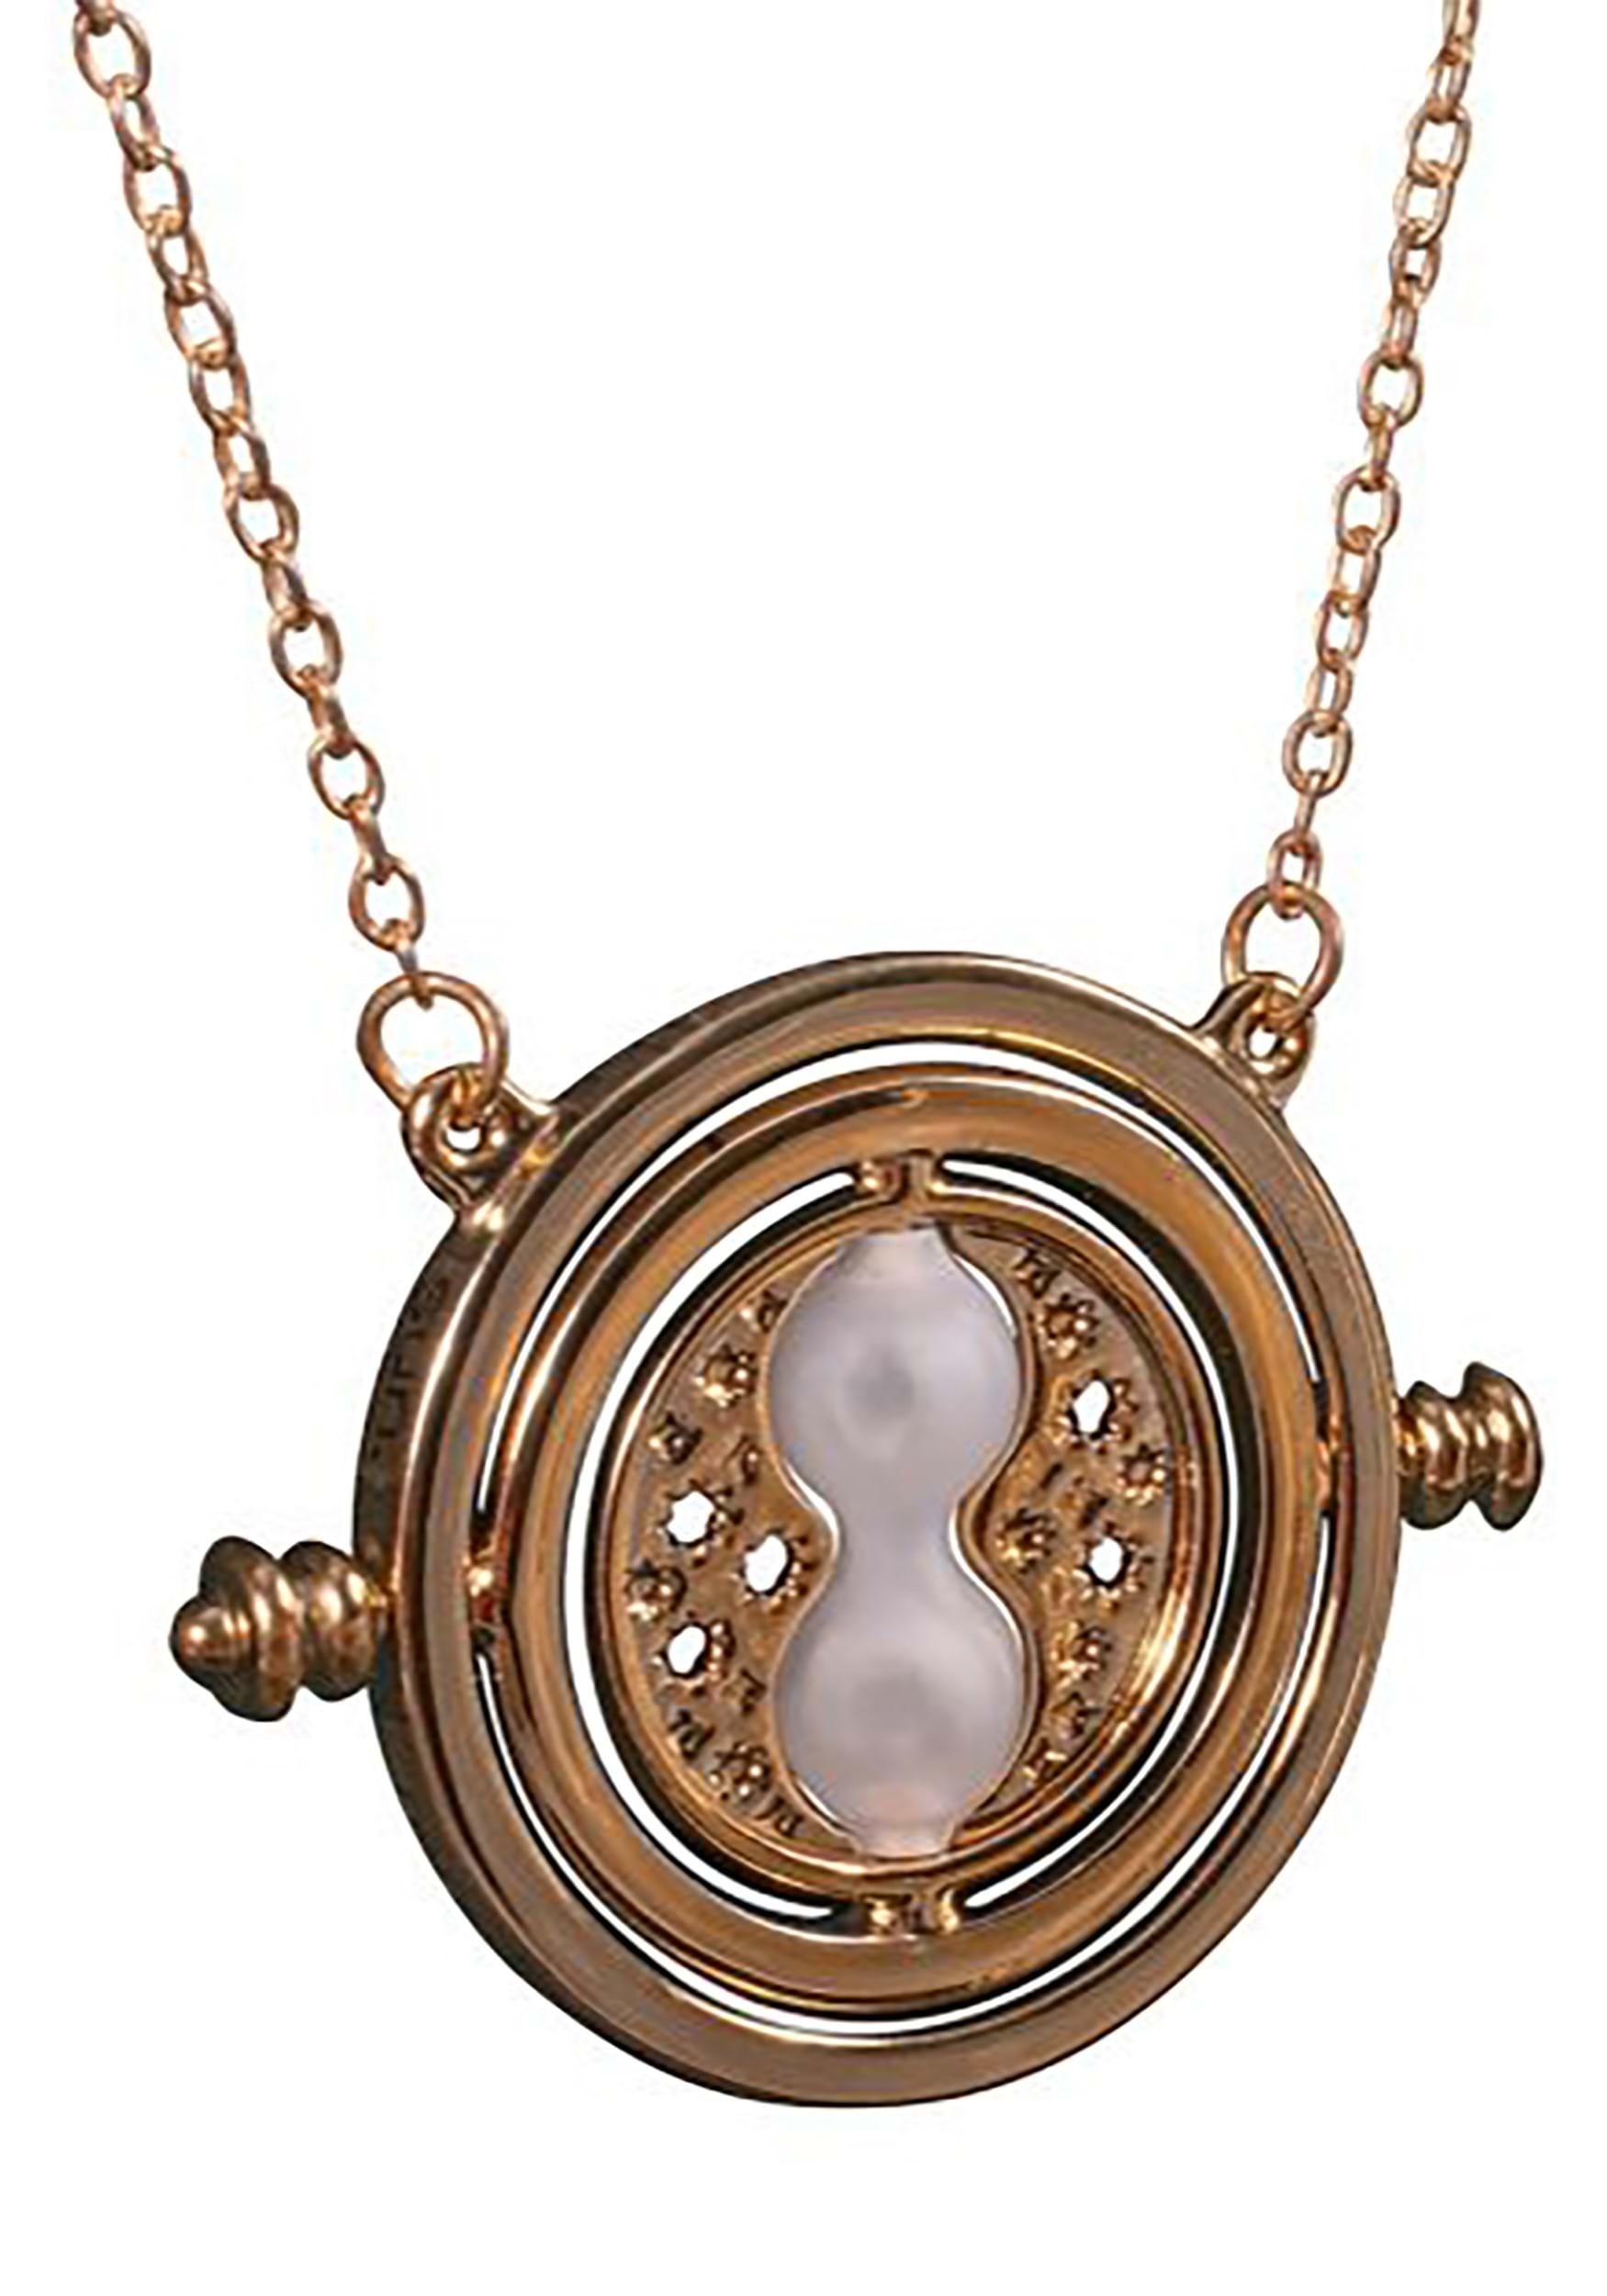 Harry Potter Time Turner Necklace Hermione Granger Rotating Spins Gold  Hourglass - Jewelry - Accessories - Themes |Costumes-AU